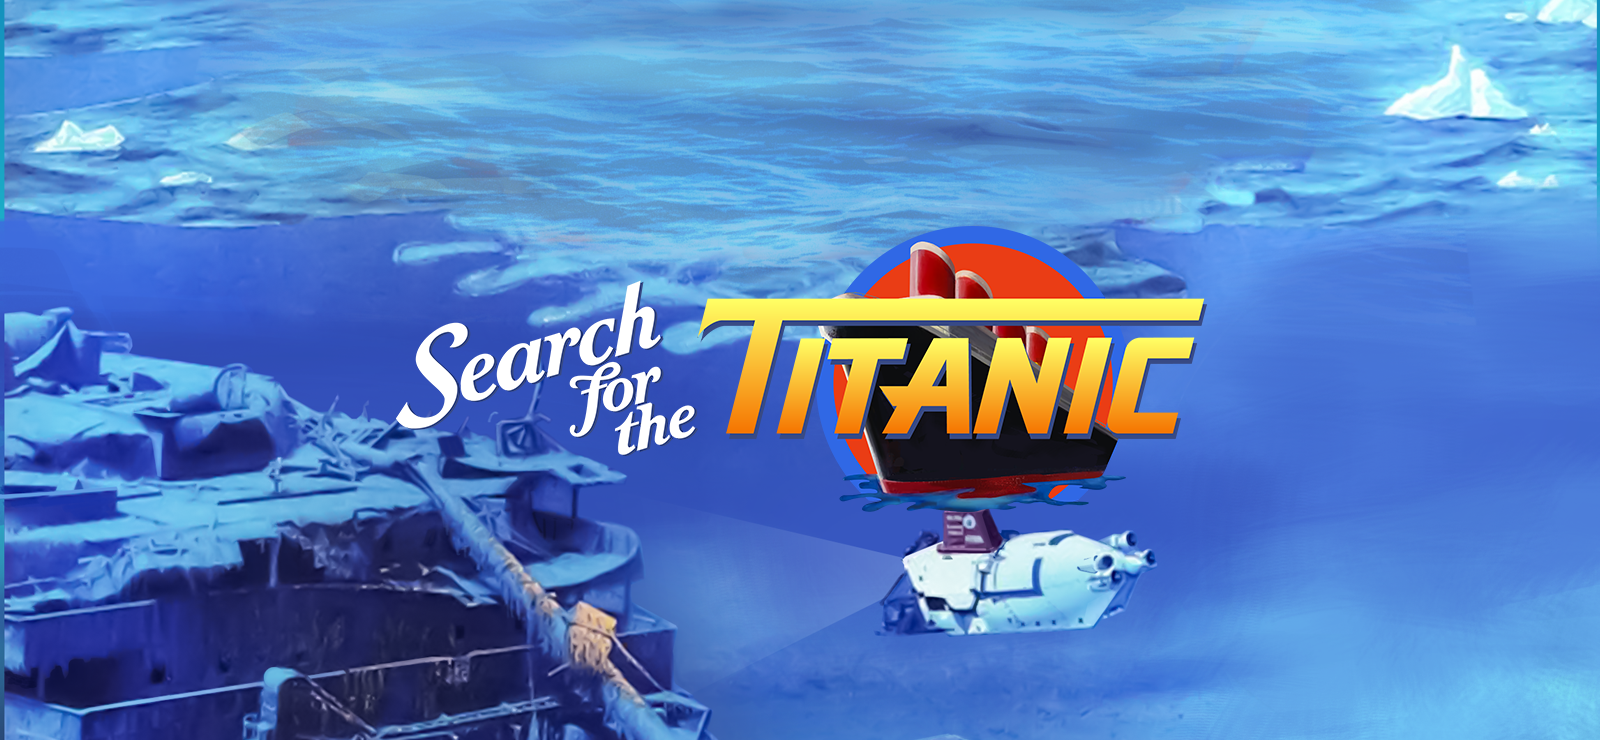 Search For The Titanic